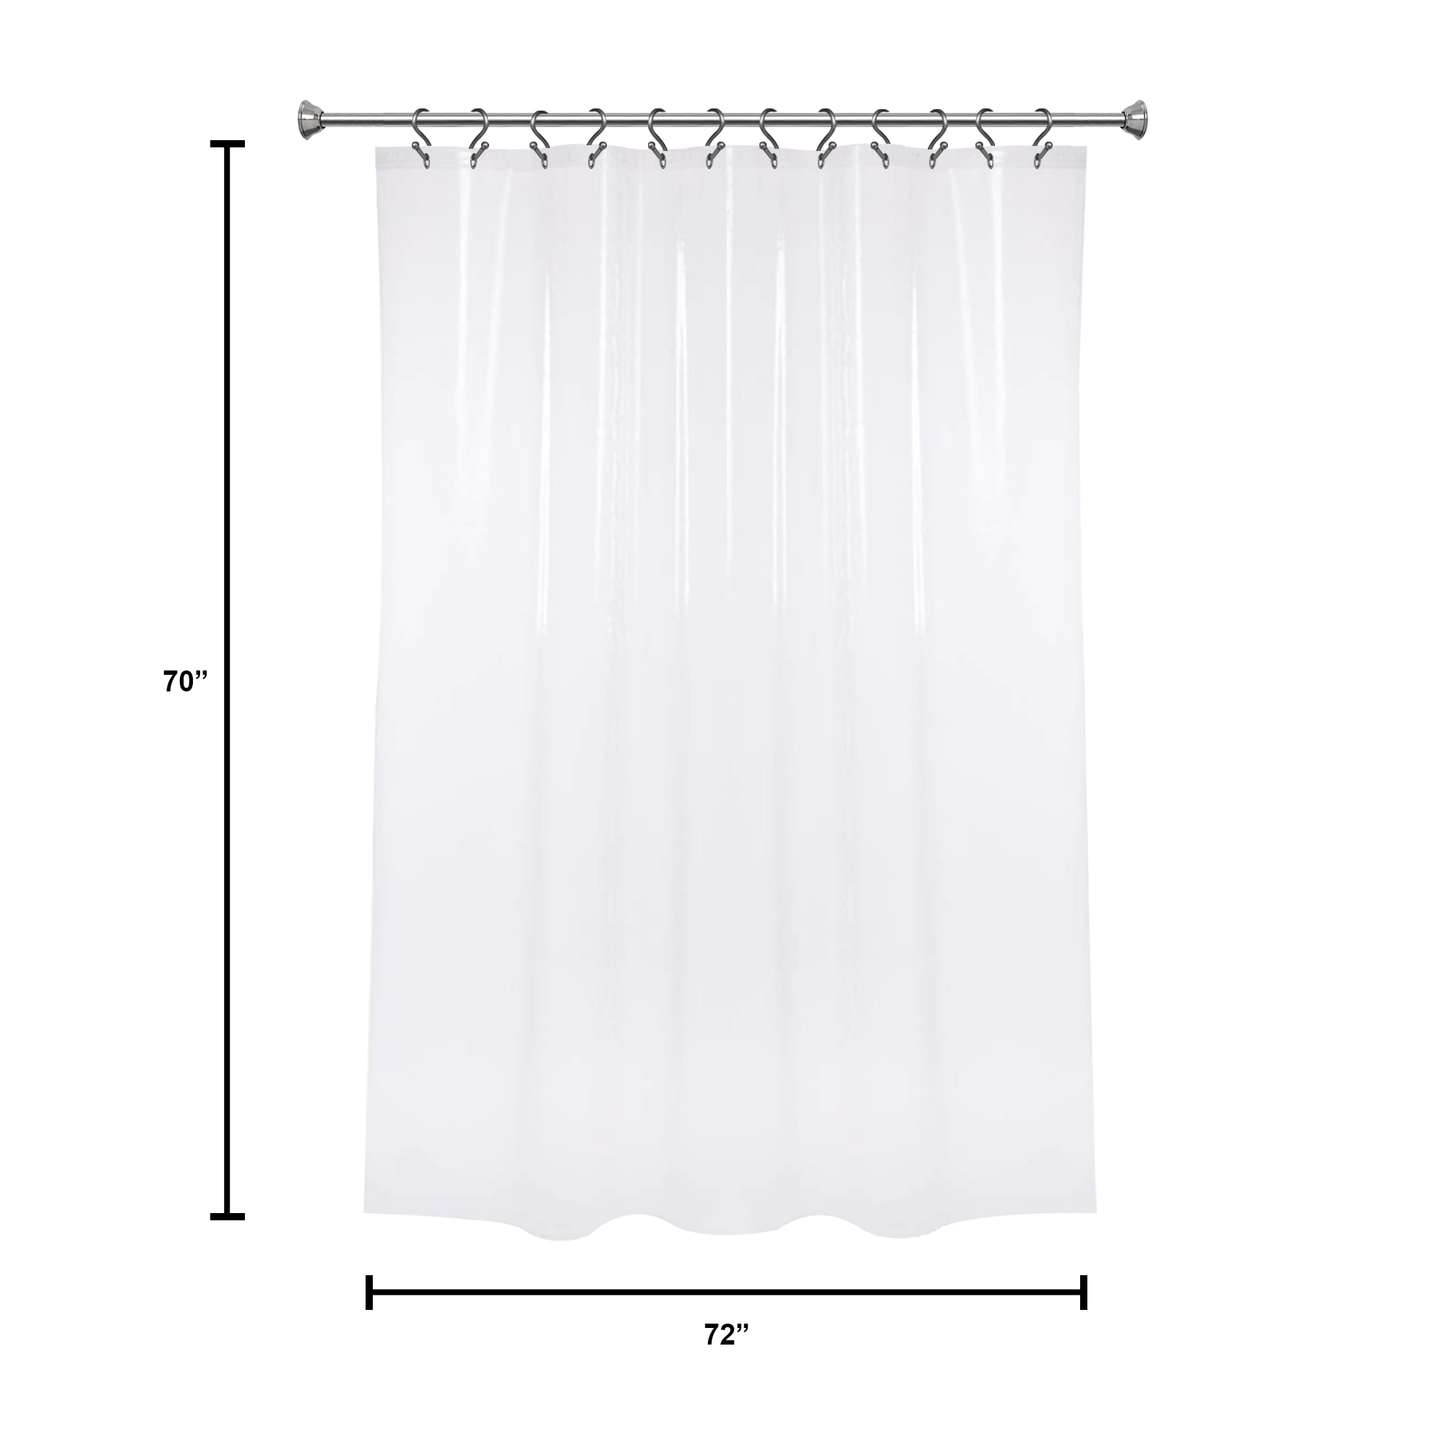 Super Heavy Weight + PEVA Shower Liner 70" X 72" - CLEAR